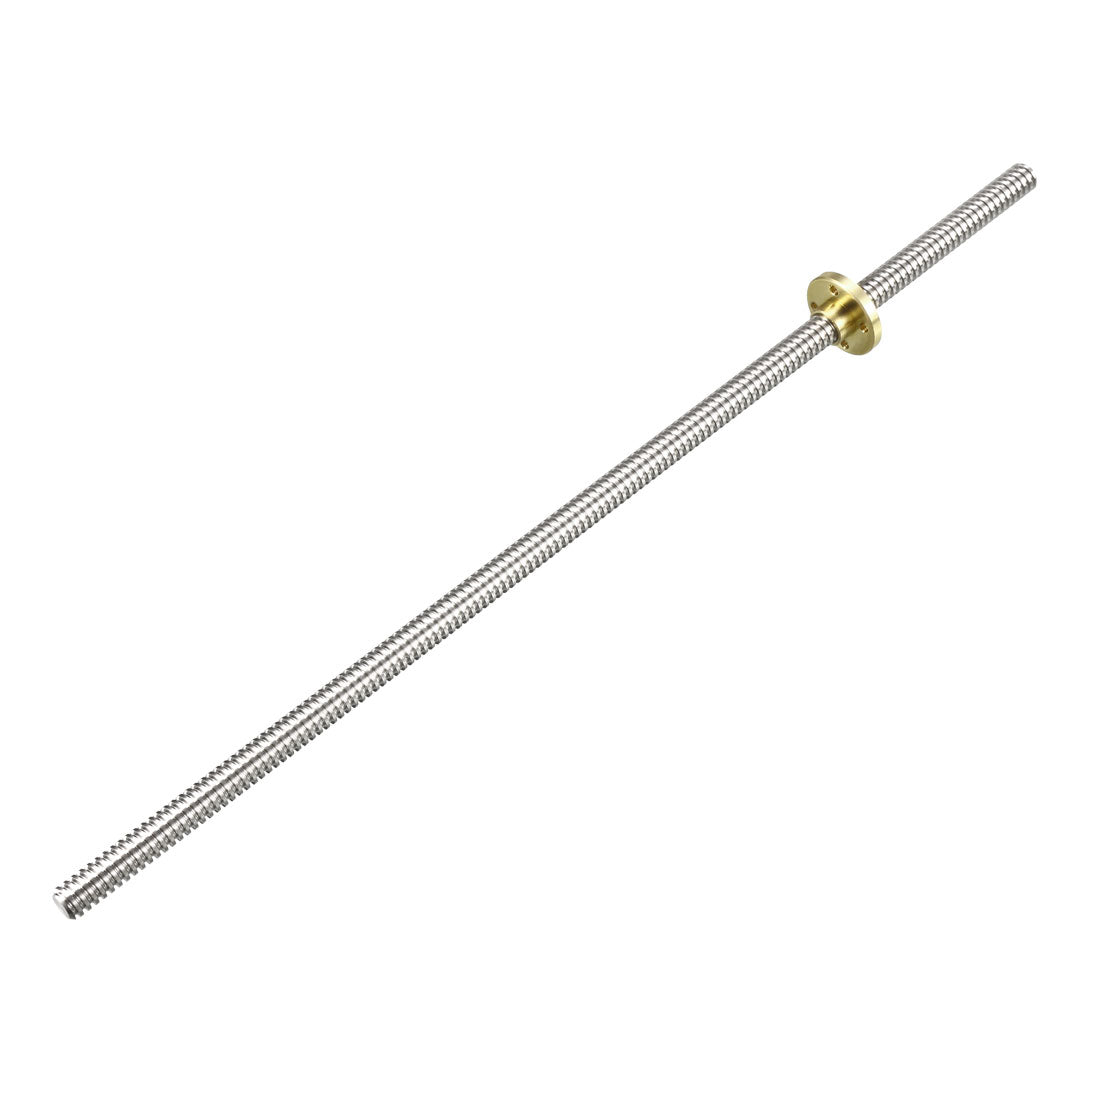 uxcell Uxcell 300mm T8 Pitch 2mm Lead 4mm Lead Screw Rod with Copper Nut for 3D Printer